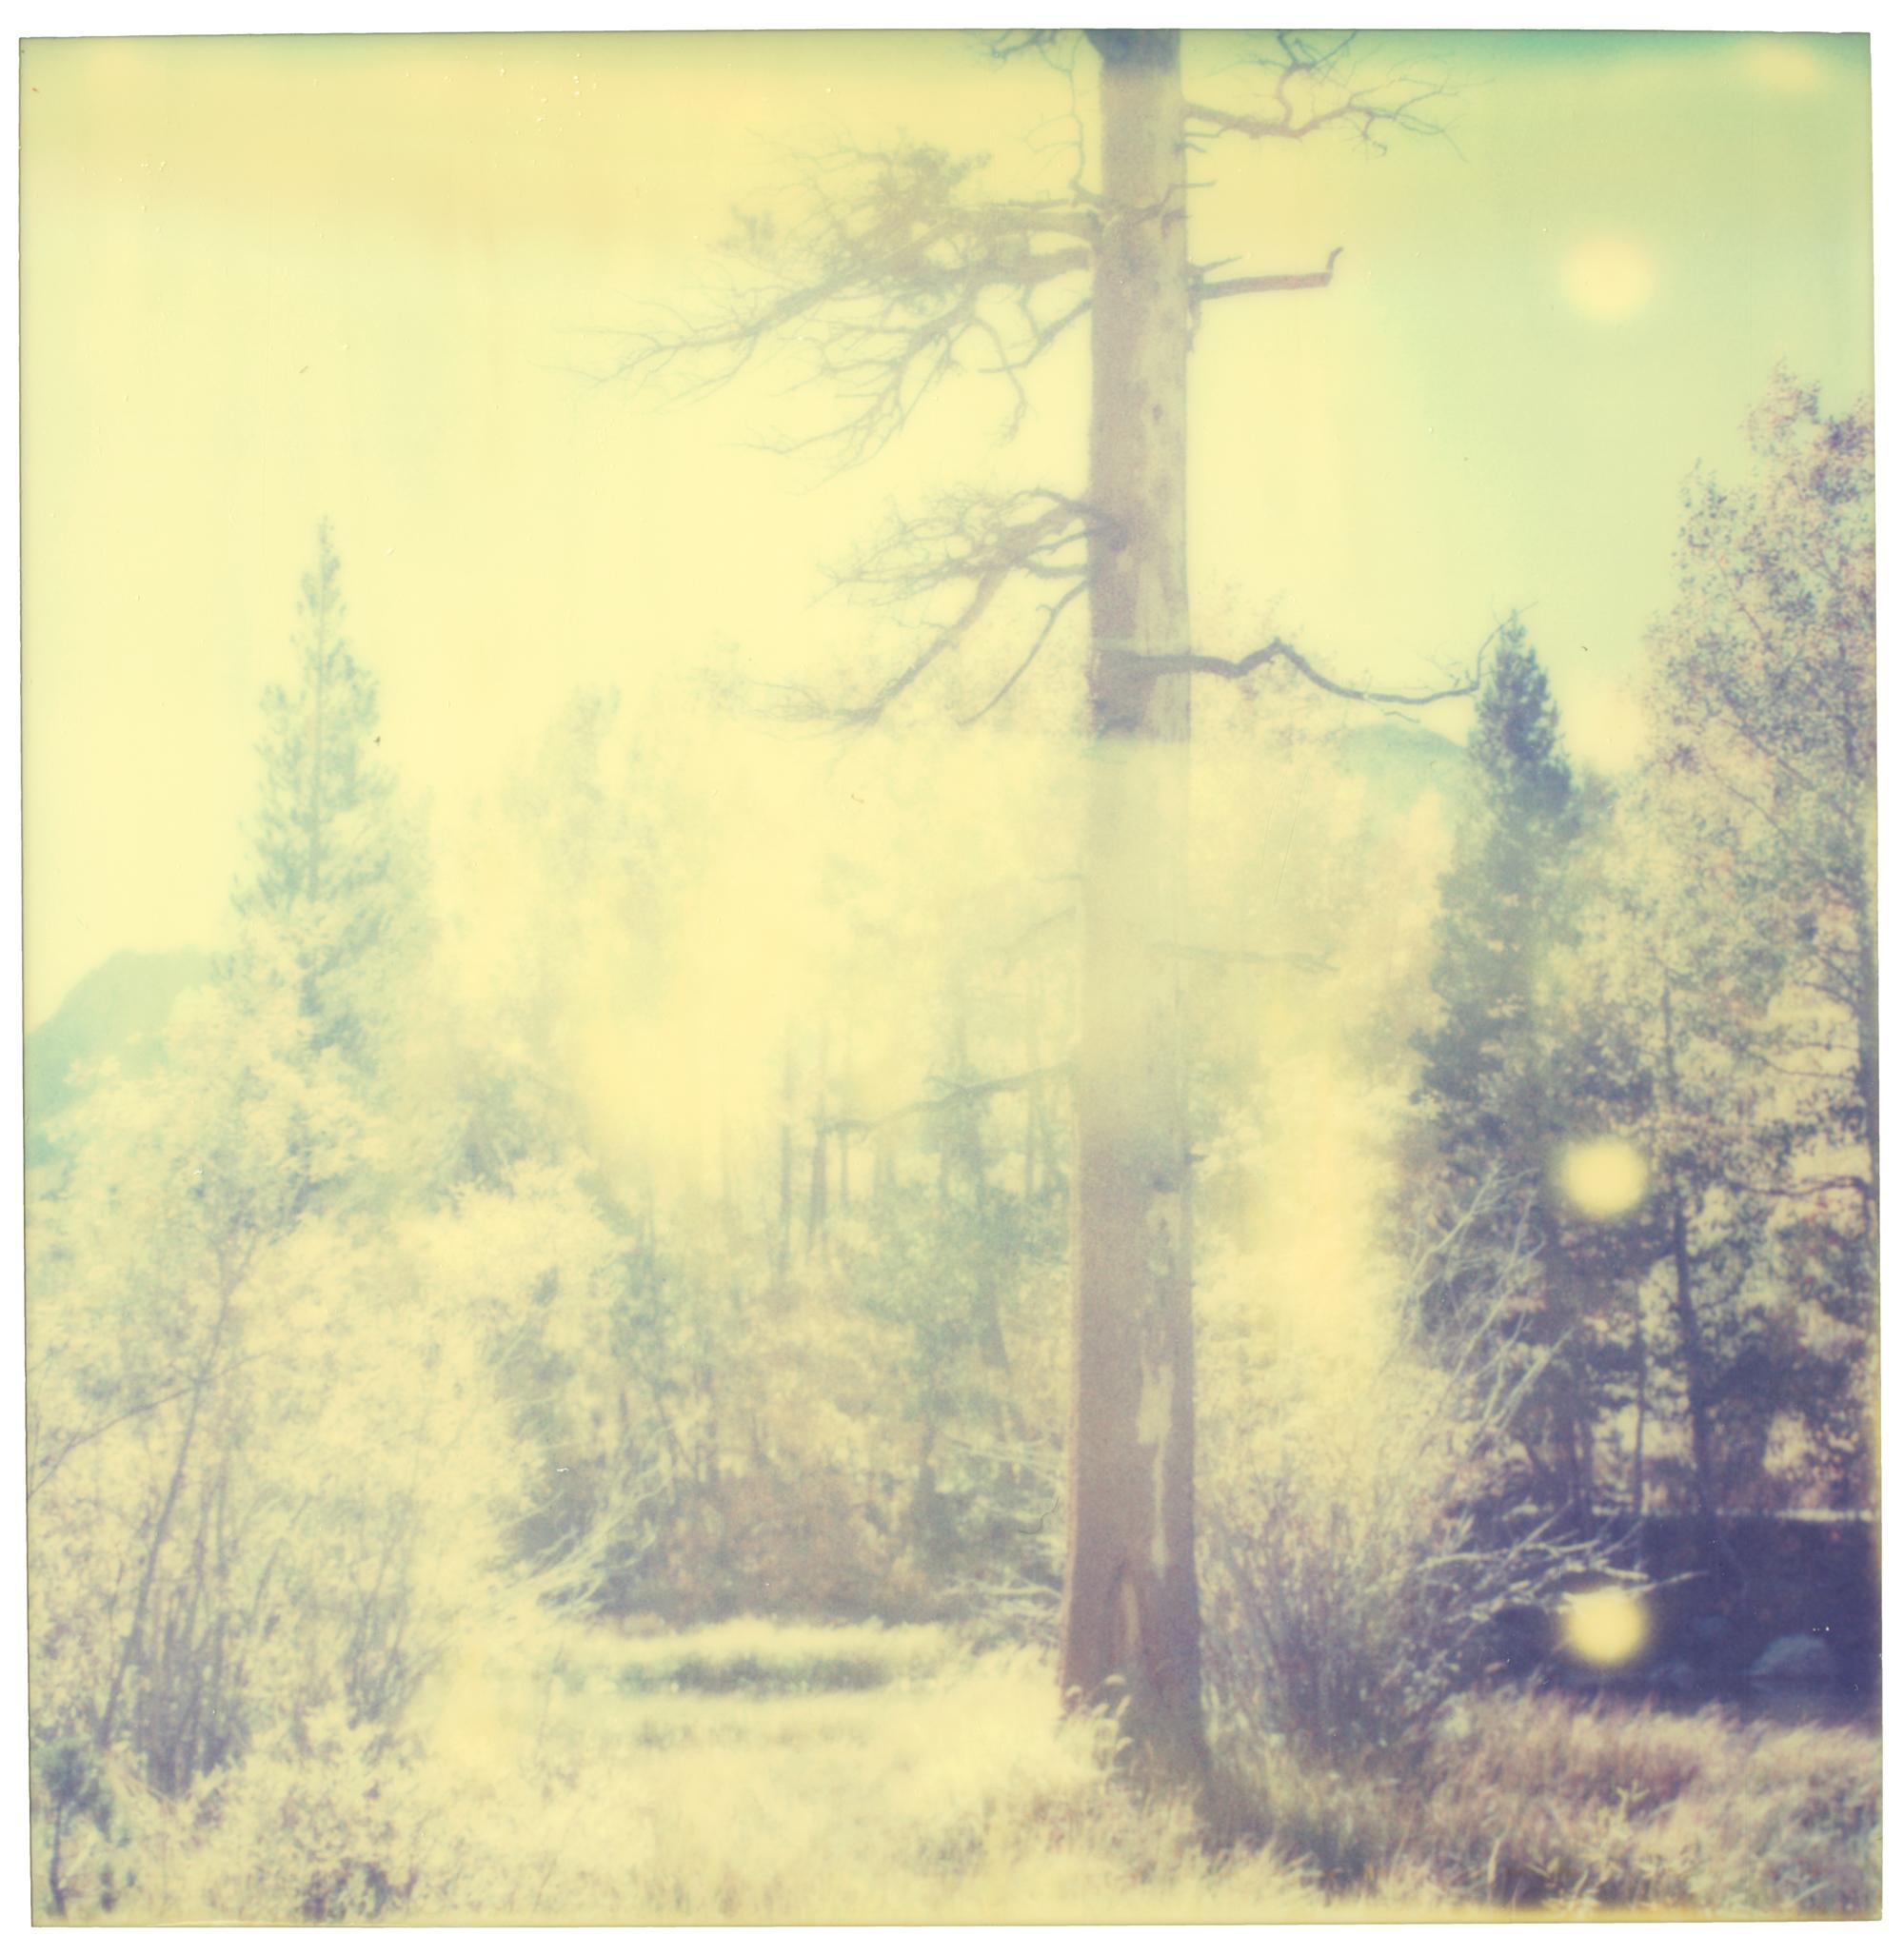 In the Range of Light III (Wastelands) - analog, Contemporary, Polaroid, Color 3